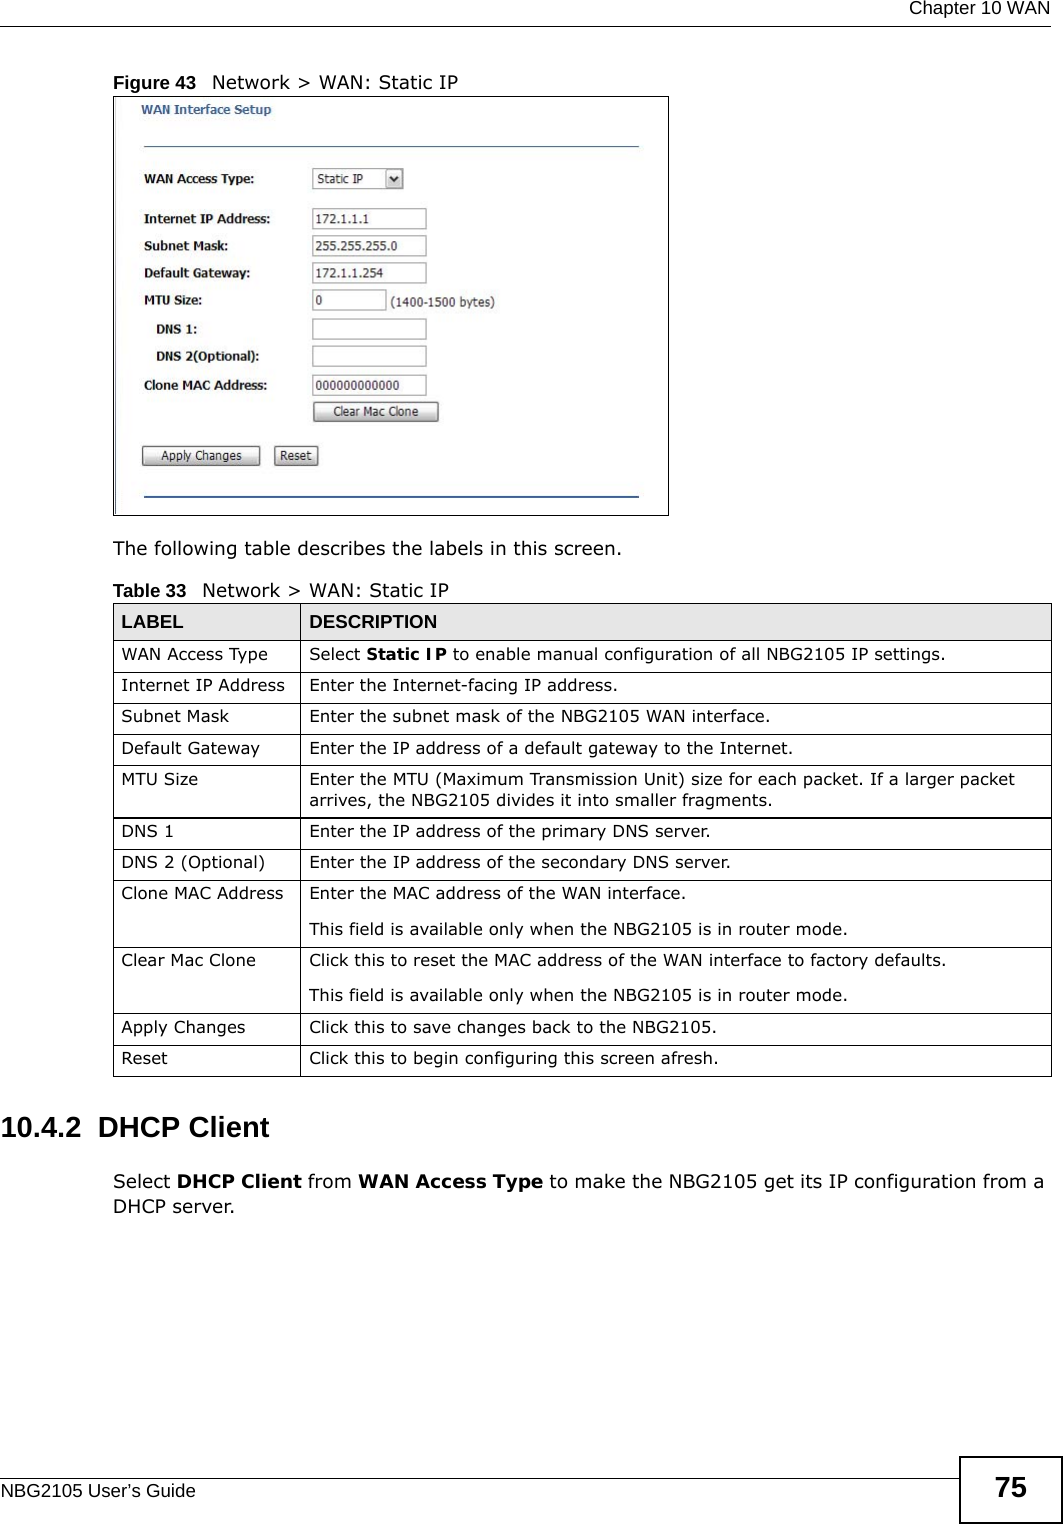  Chapter 10 WANNBG2105 User’s Guide 75Figure 43   Network &gt; WAN: Static IP The following table describes the labels in this screen.10.4.2  DHCP ClientSelect DHCP Client from WAN Access Type to make the NBG2105 get its IP configuration from a DHCP server.Table 33   Network &gt; WAN: Static IPLABEL DESCRIPTIONWAN Access Type Select Static IP to enable manual configuration of all NBG2105 IP settings.Internet IP Address Enter the Internet-facing IP address.Subnet Mask Enter the subnet mask of the NBG2105 WAN interface.Default Gateway Enter the IP address of a default gateway to the Internet.MTU Size Enter the MTU (Maximum Transmission Unit) size for each packet. If a larger packet arrives, the NBG2105 divides it into smaller fragments.DNS 1 Enter the IP address of the primary DNS server.DNS 2 (Optional) Enter the IP address of the secondary DNS server.Clone MAC Address Enter the MAC address of the WAN interface.This field is available only when the NBG2105 is in router mode.Clear Mac Clone Click this to reset the MAC address of the WAN interface to factory defaults.This field is available only when the NBG2105 is in router mode.Apply Changes Click this to save changes back to the NBG2105.Reset Click this to begin configuring this screen afresh.